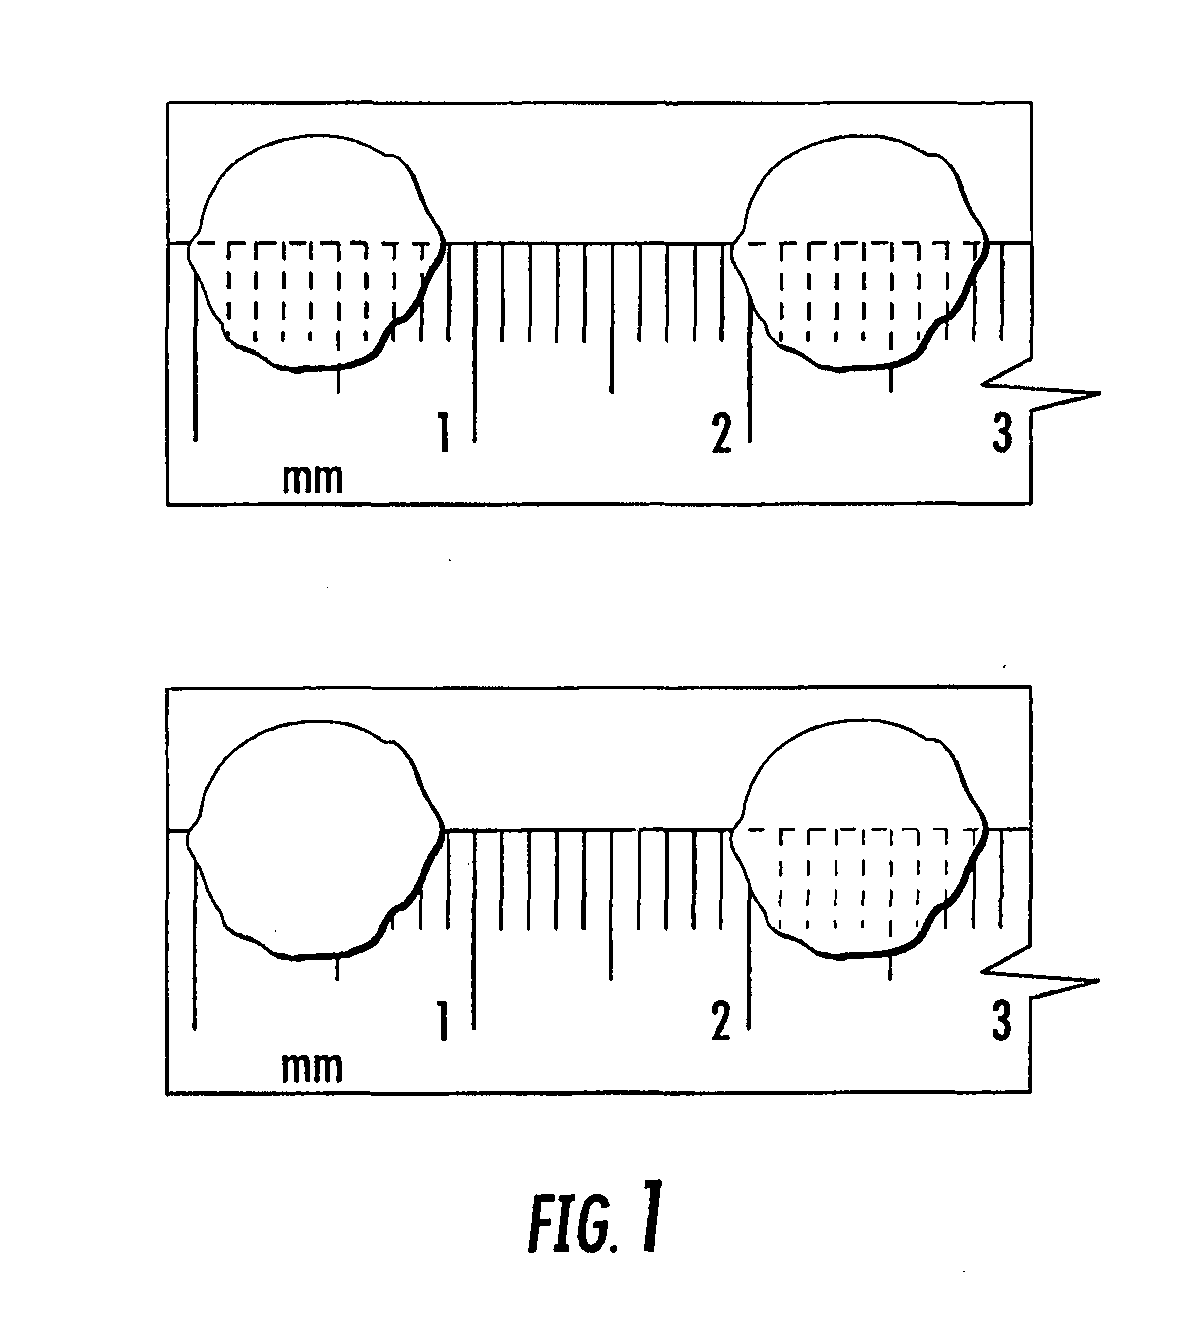 Engineered cardiac derived compositions and methods of use